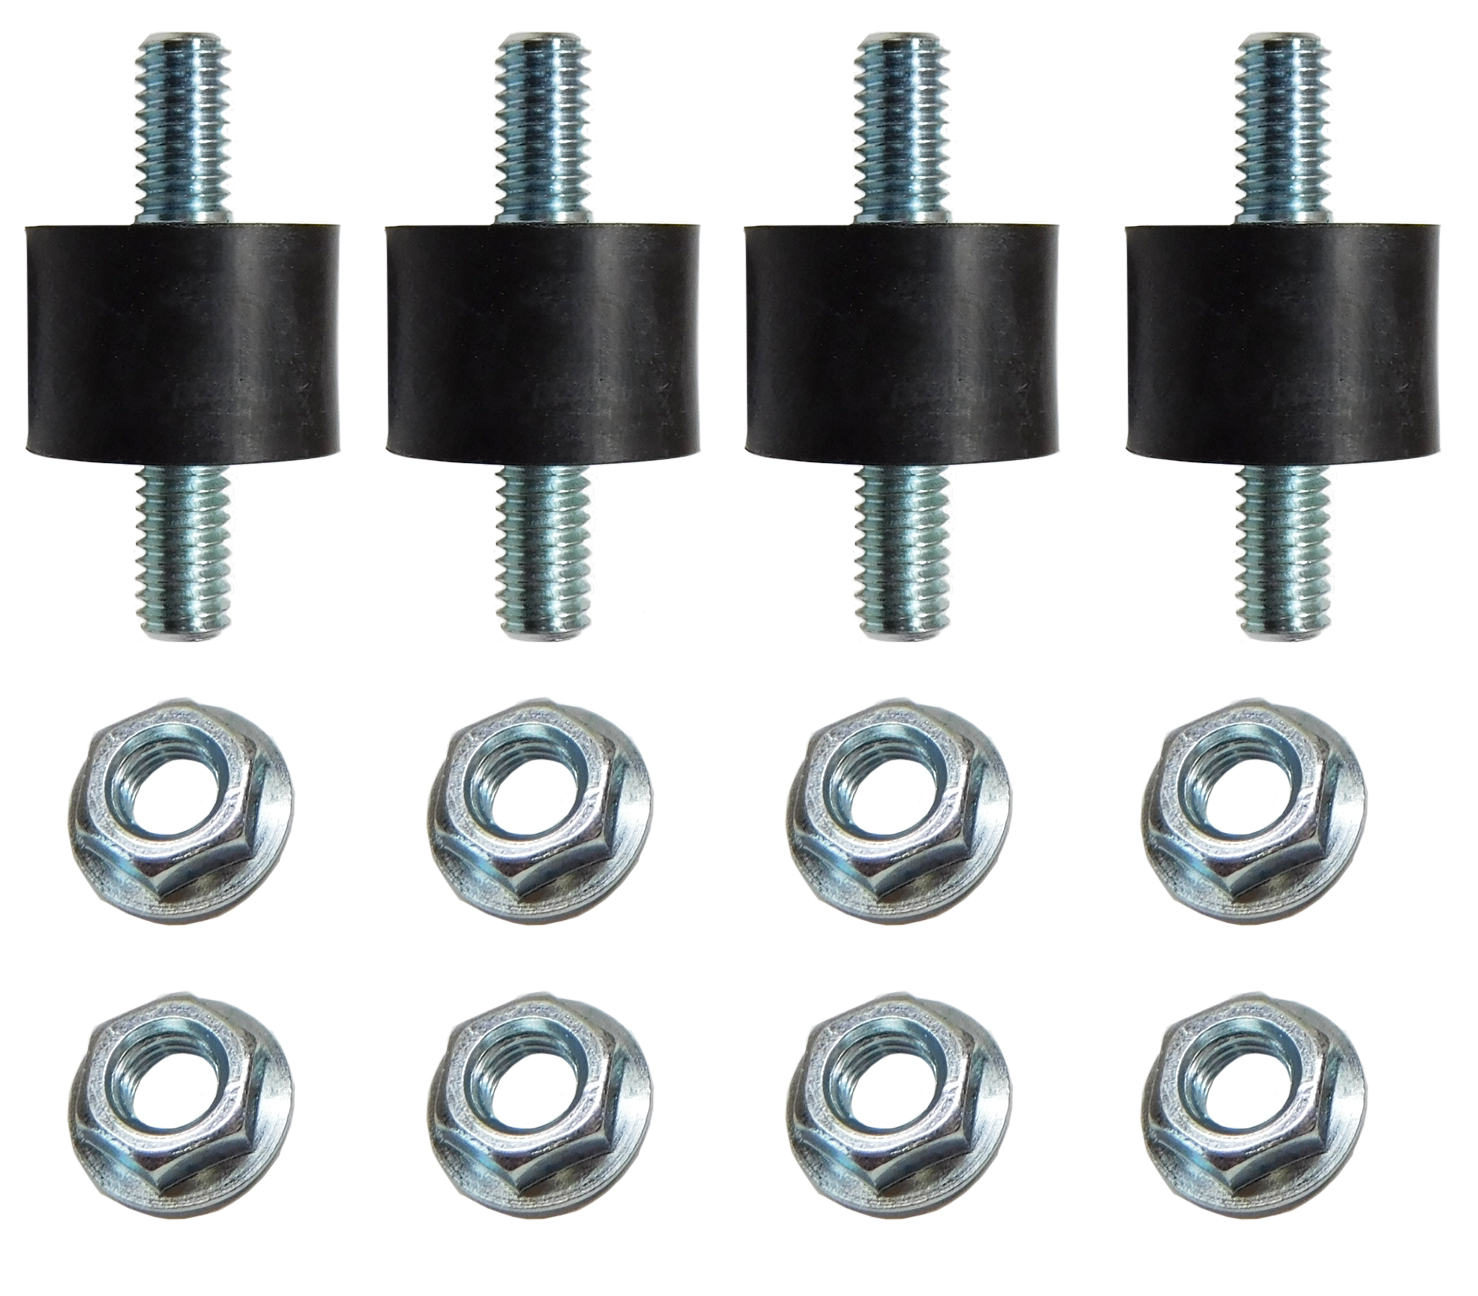 1964 Chevrolet Impala/Caprice/Bel Air AIR CONDITIONING MOUNTING STUD INSULATOR (THIS IS THE 3/4'' ROUND RUBBER INSULATOR WITH A 5/16'' STUD ON EACH END) - KIT (4 PIECE) | AC1234Z